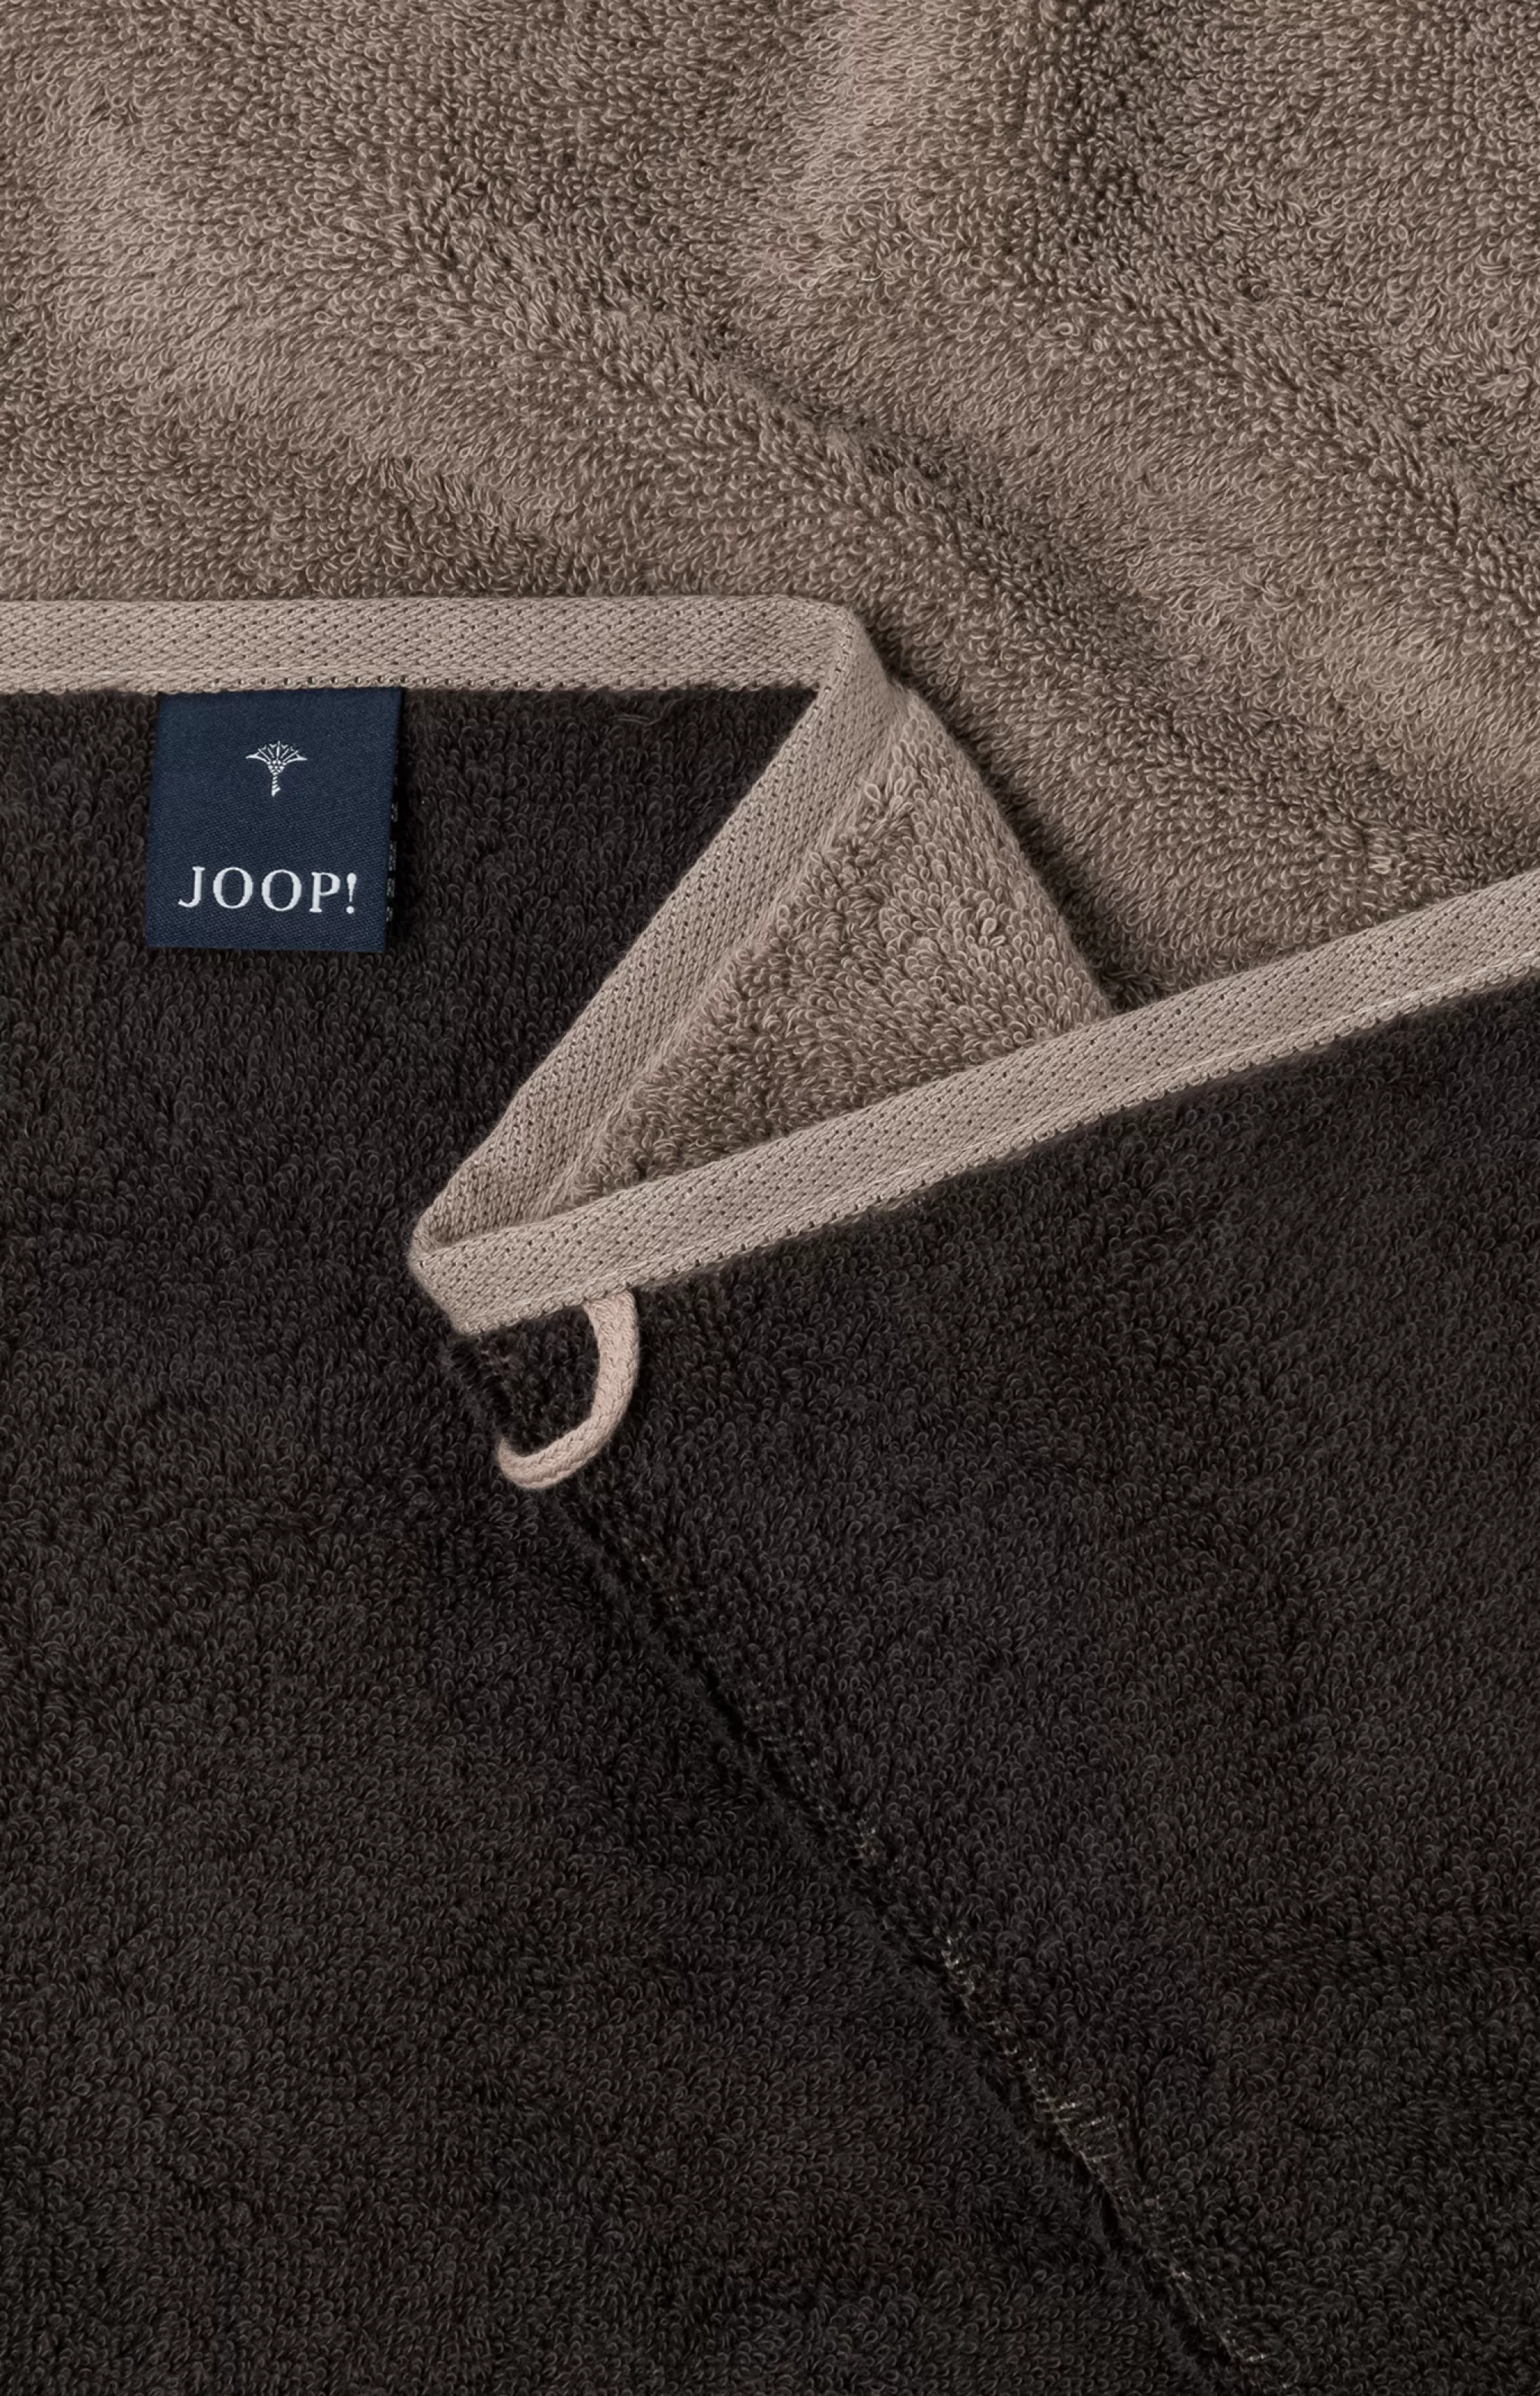 - Guest Towel | Discover Everything*JOOP - Guest Towel | Discover Everything ! CLASSIC DOUBLEFACE Terrycloth Range in